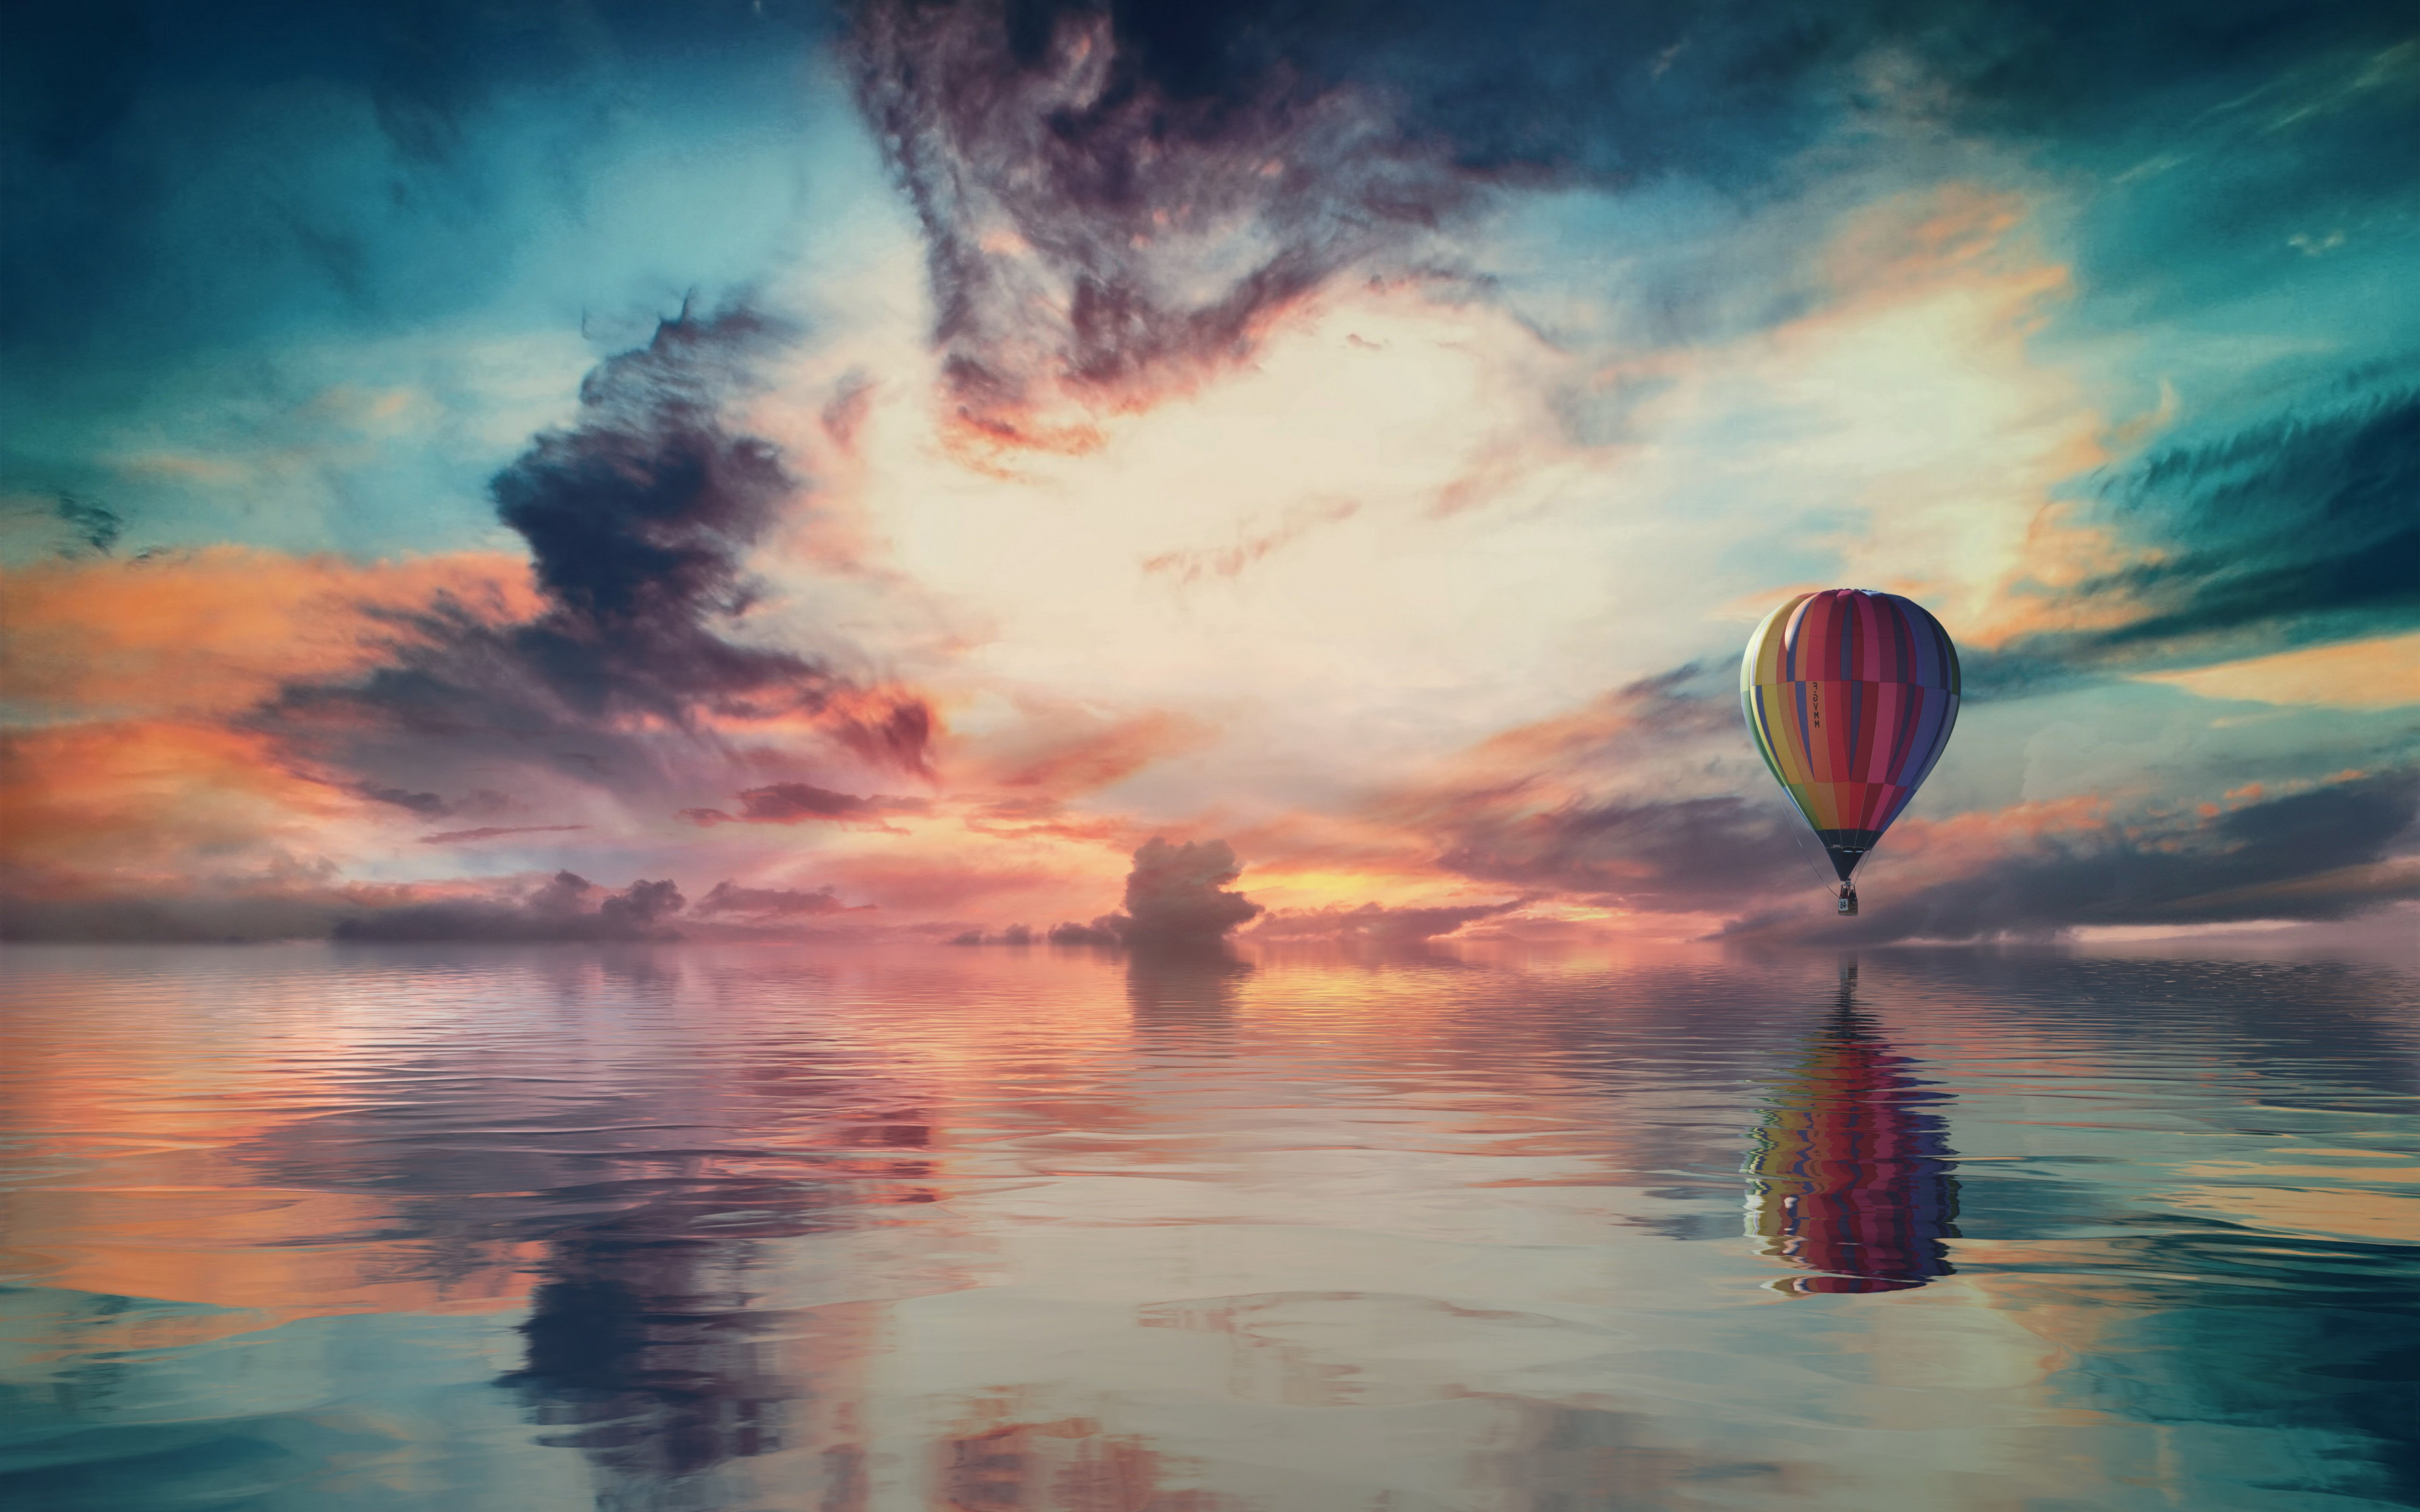 Fantasy travel with the hot air balloon wallpaper 3840x2400